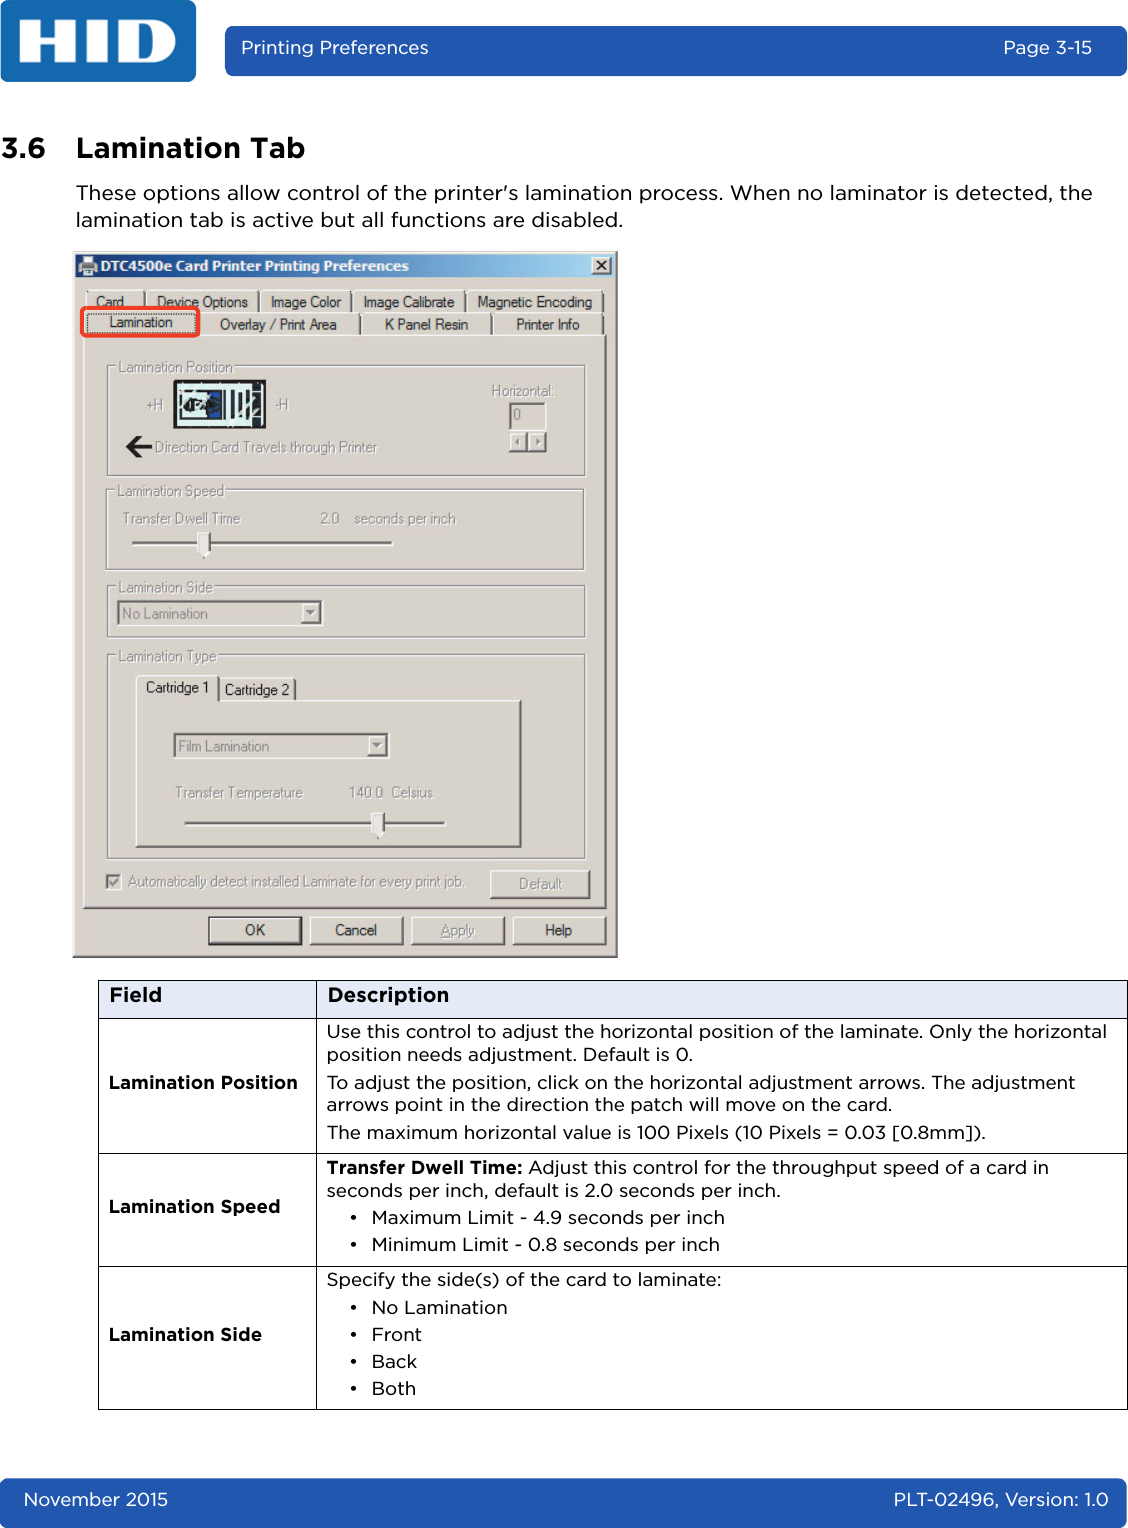 November 2015 PLT-02496, Version: 1.0Printing Preferences Page 3-153.6 Lamination TabThese options allow control of the printer&apos;s lamination process. When no laminator is detected, the lamination tab is active but all functions are disabled.Field DescriptionLamination PositionUse this control to adjust the horizontal position of the laminate. Only the horizontal position needs adjustment. Default is 0.To adjust the position, click on the horizontal adjustment arrows. The adjustment arrows point in the direction the patch will move on the card. The maximum horizontal value is 100 Pixels (10 Pixels = 0.03 [0.8mm]).Lamination SpeedTransfer Dwell Time: Adjust this control for the throughput speed of a card in seconds per inch, default is 2.0 seconds per inch.• Maximum Limit - 4.9 seconds per inch• Minimum Limit - 0.8 seconds per inchLamination SideSpecify the side(s) of the card to laminate:• No Lamination •Front•Back •Both 